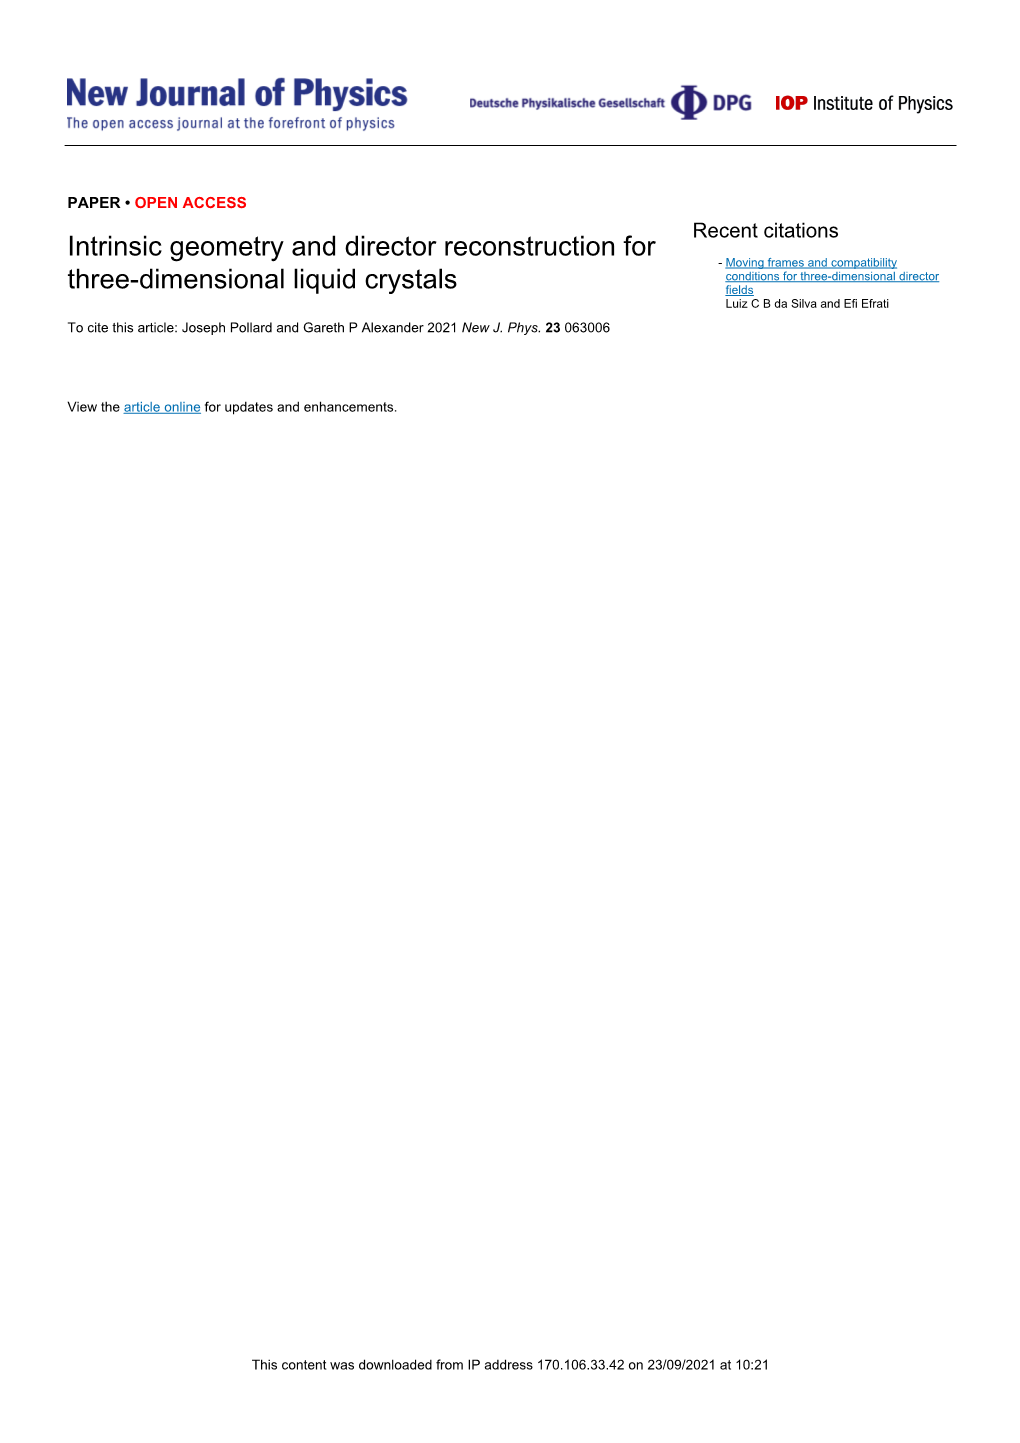 PDF, Intrinsic Geometry and Director Reconstruction for Three-Dimensional Liquid Crystals